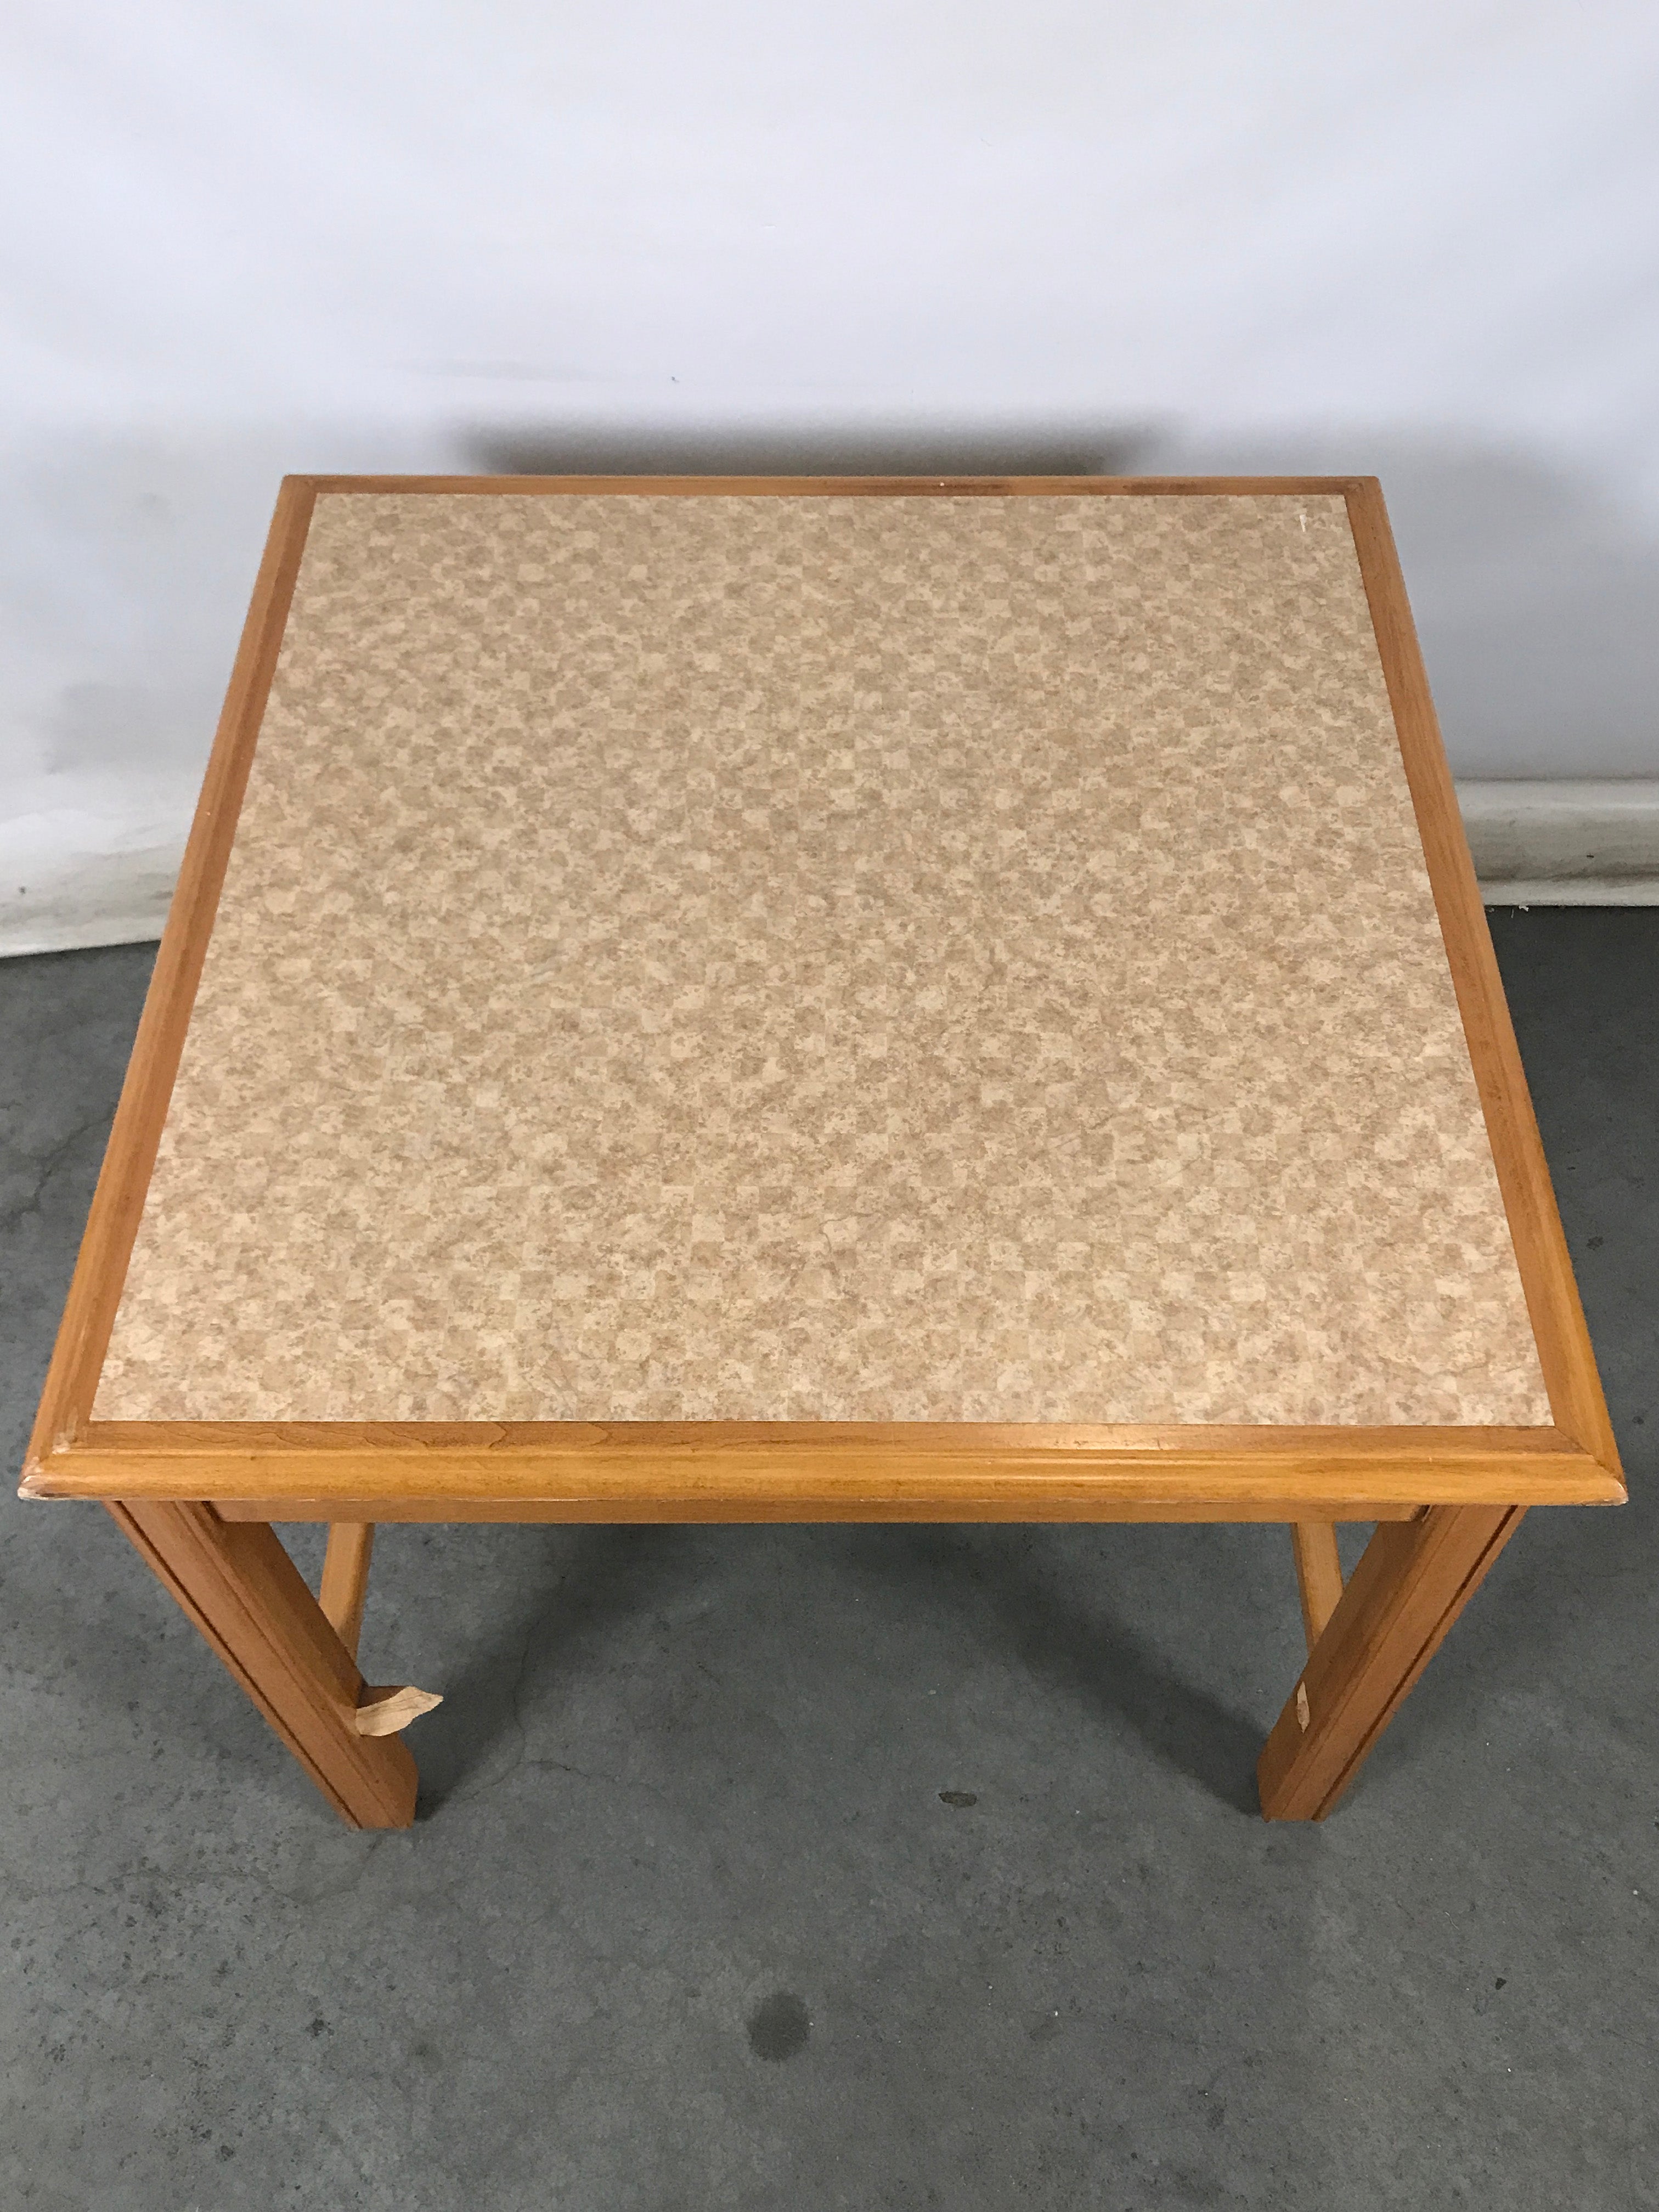 Nemschoff Square Wooden Table With Checkered Design